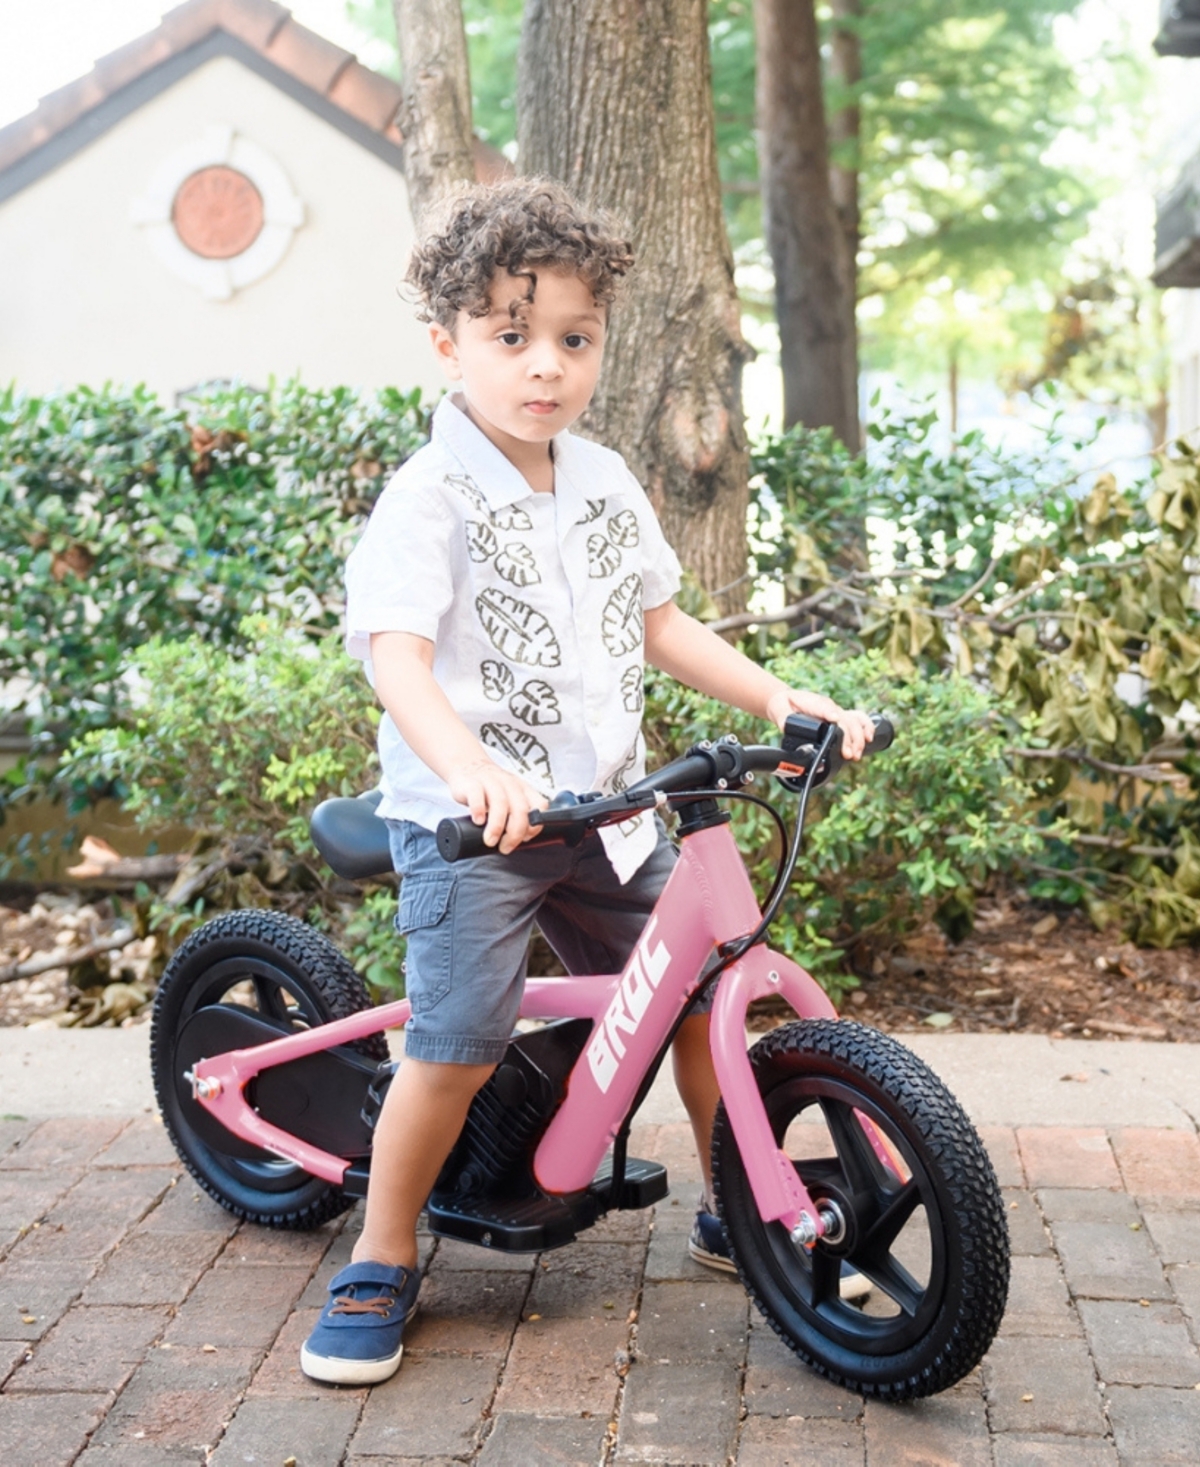 Shop Best Ride On Cars Broc Usa E-bikes D12 Powered Ride-on In Pink